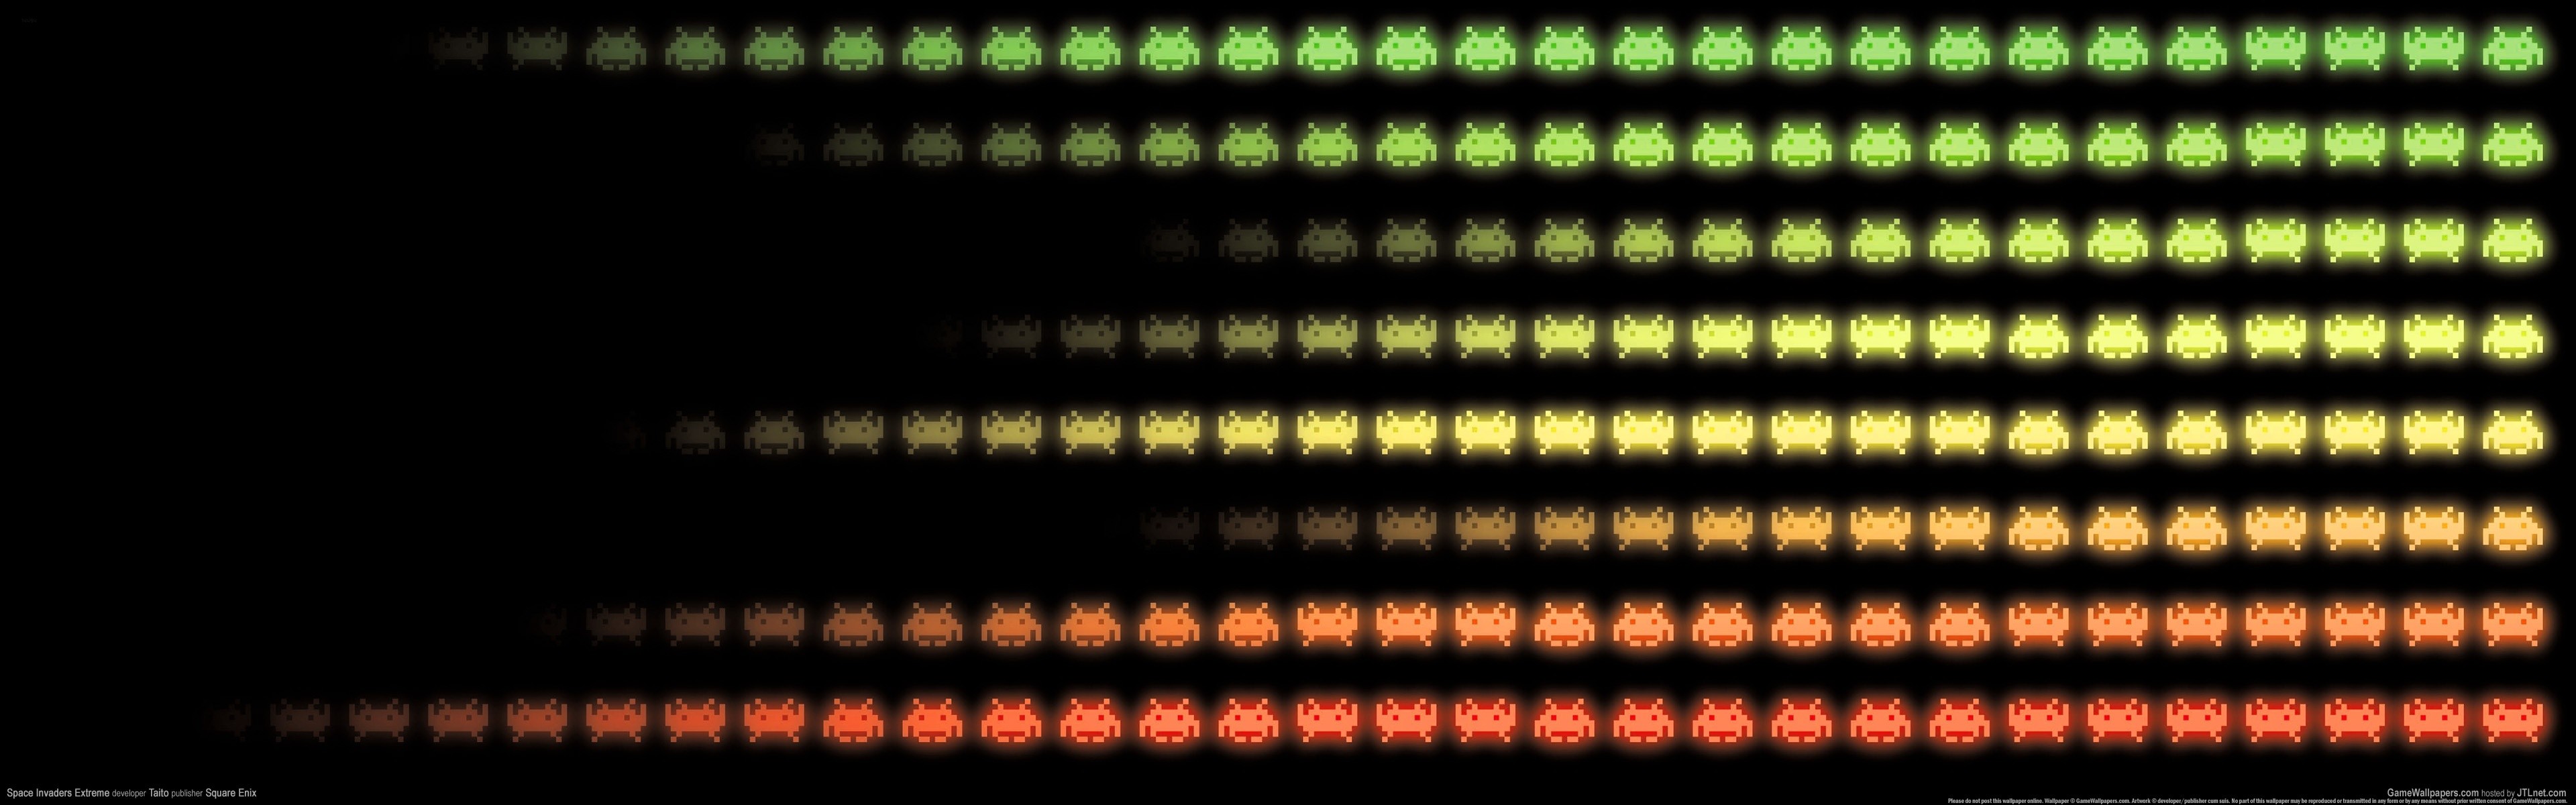 3840x1200 Double Space Invaders